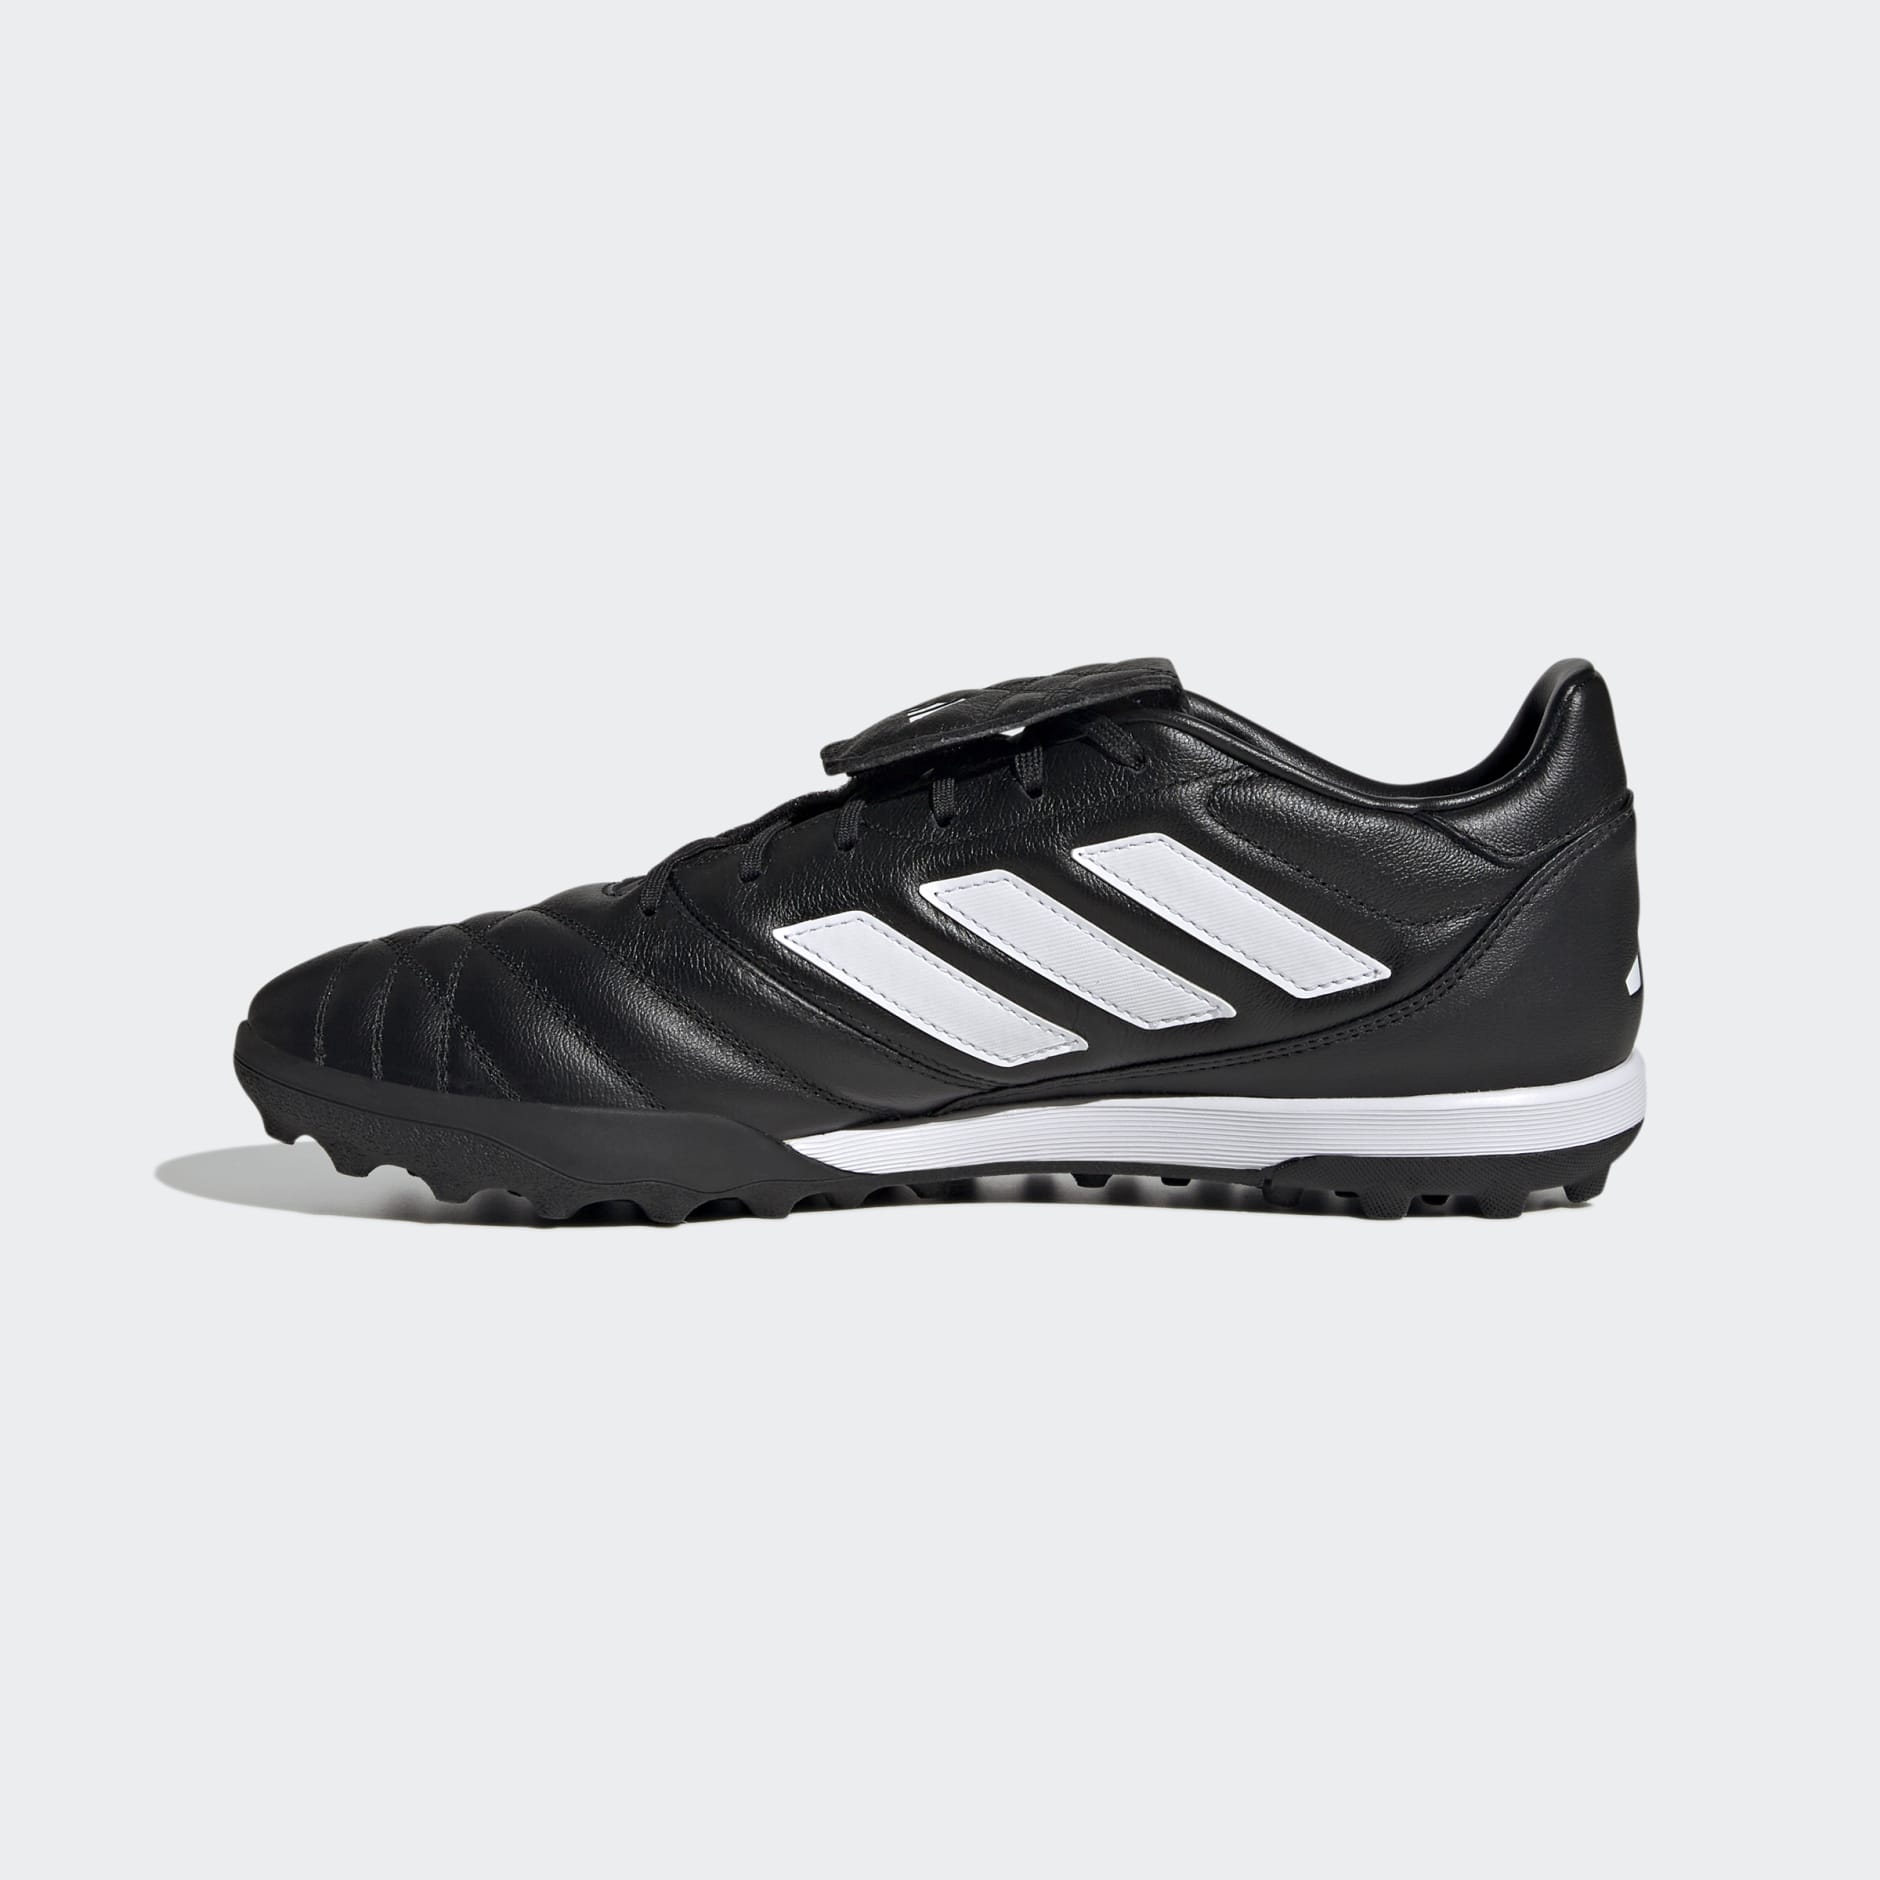 All products - Copa Gloro Turf Boots - Black | adidas South Africa